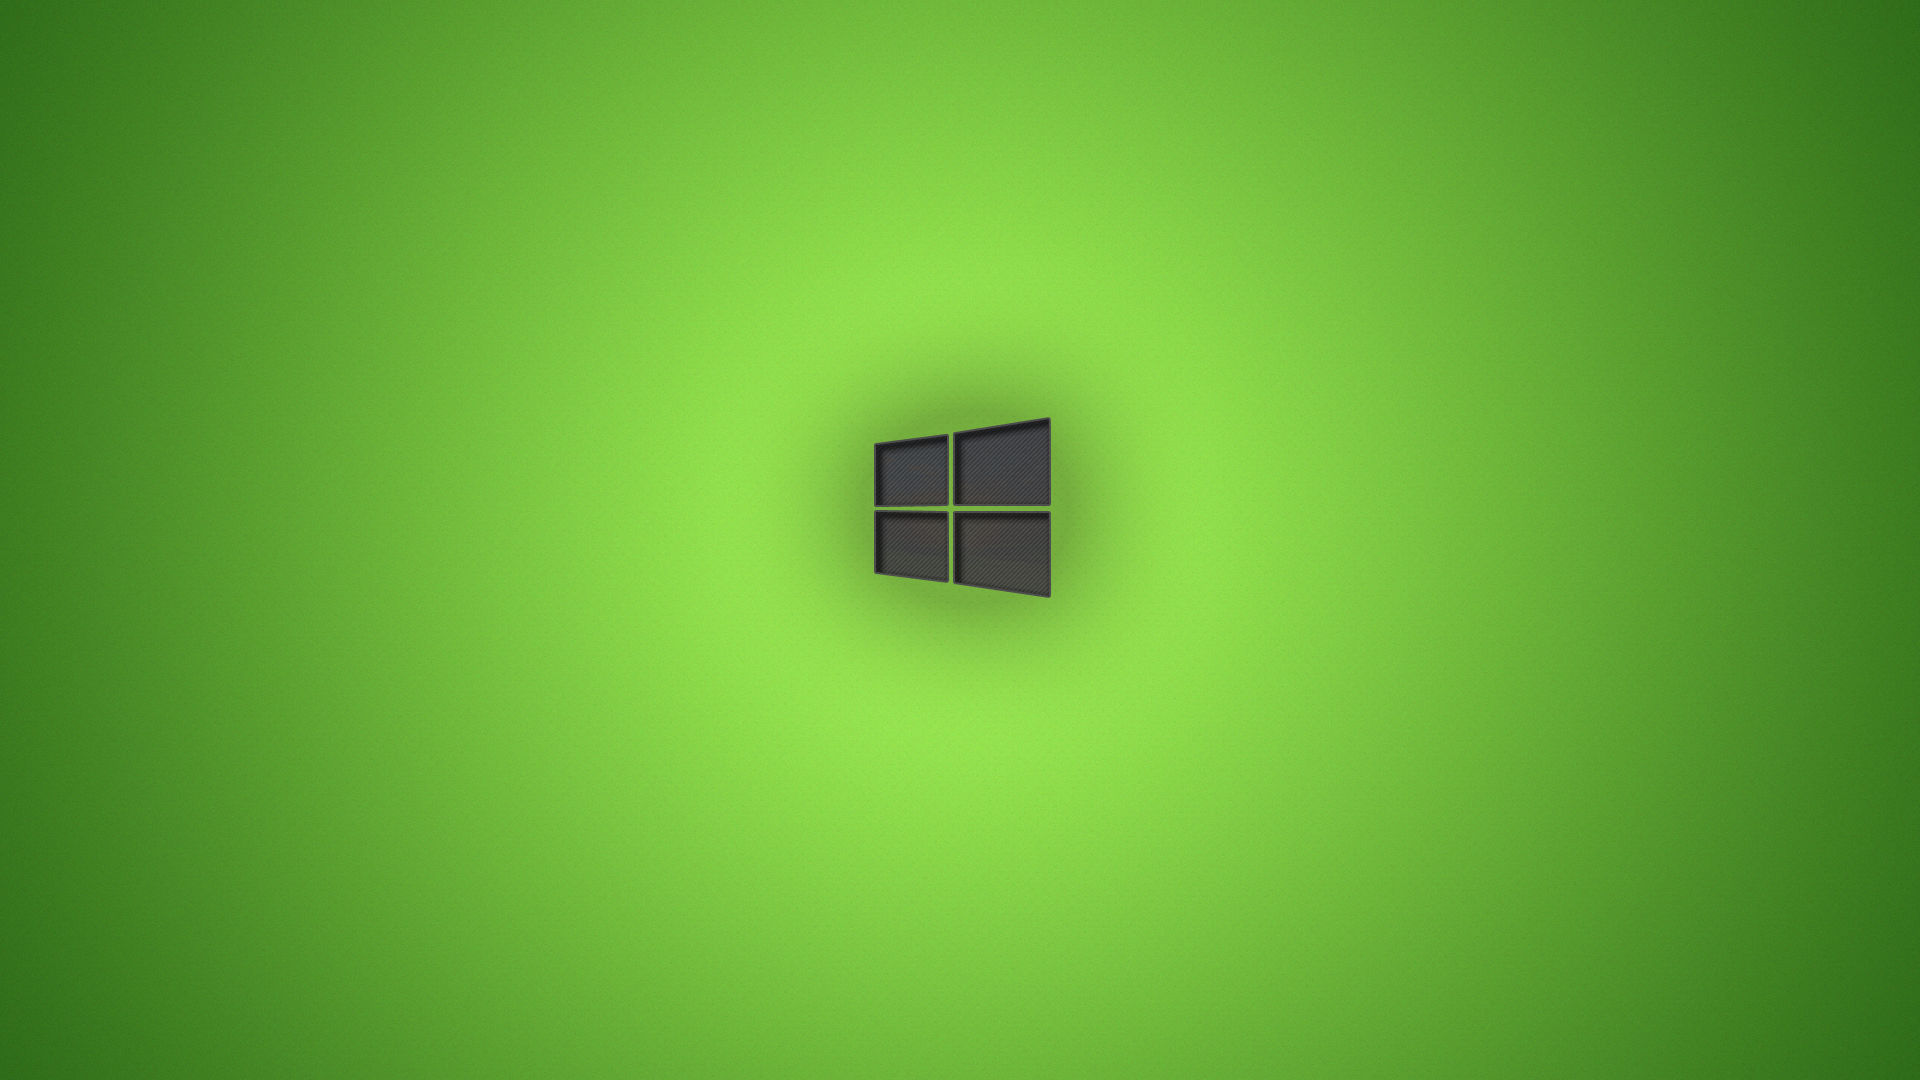 Awesome Windows Wallpaper On